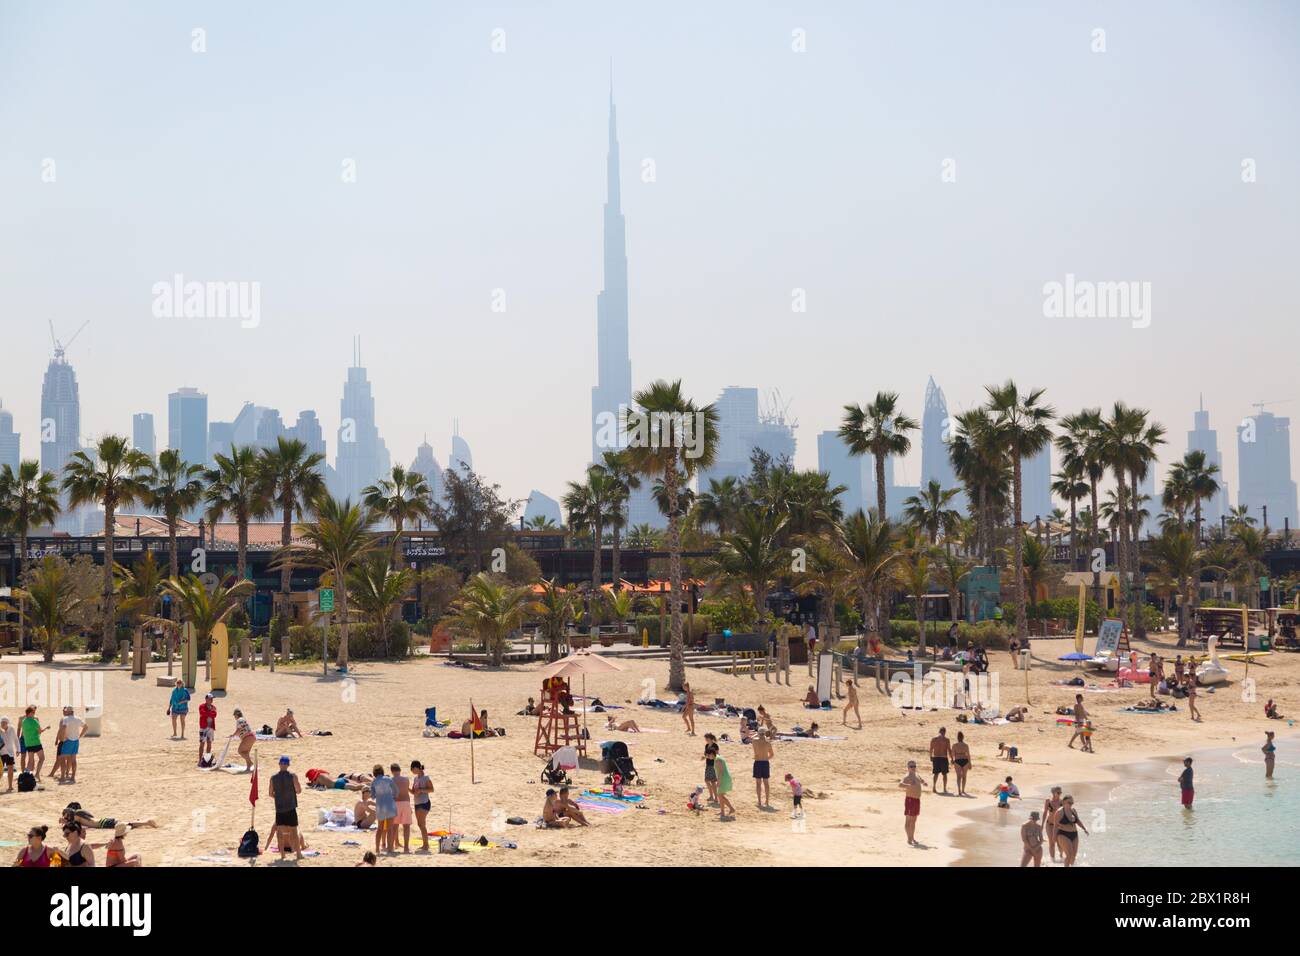 La Mer is the new beach area of Dubai, a city beach with a unique atmosphere of modern comfort. Wide boulevards, palm trees, graffiti, cafes and resta Stock Photo